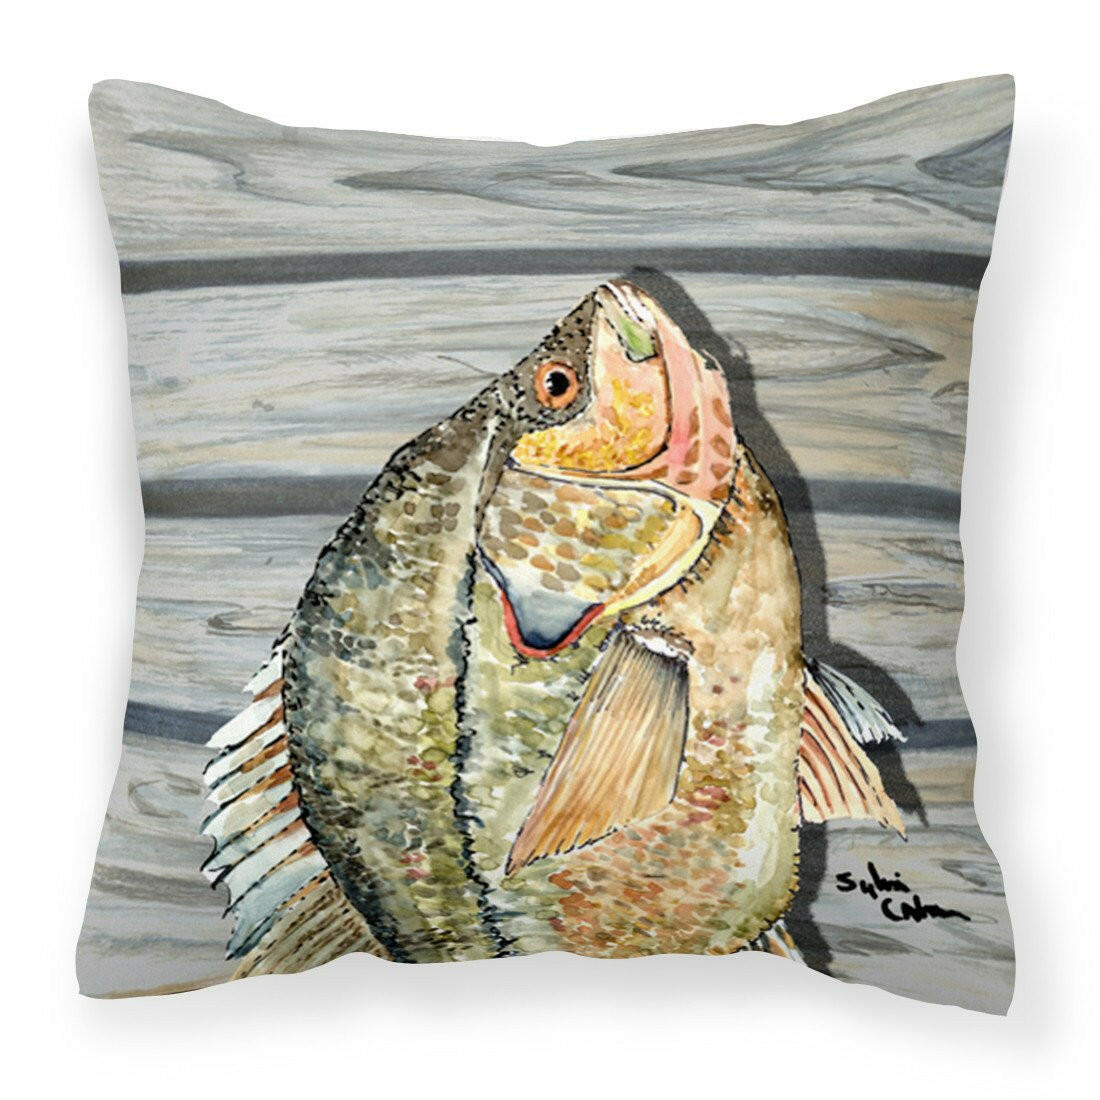 Croppie Fish on Pier Fabric Decorative Pillow 8498PW1414 - the-store.com